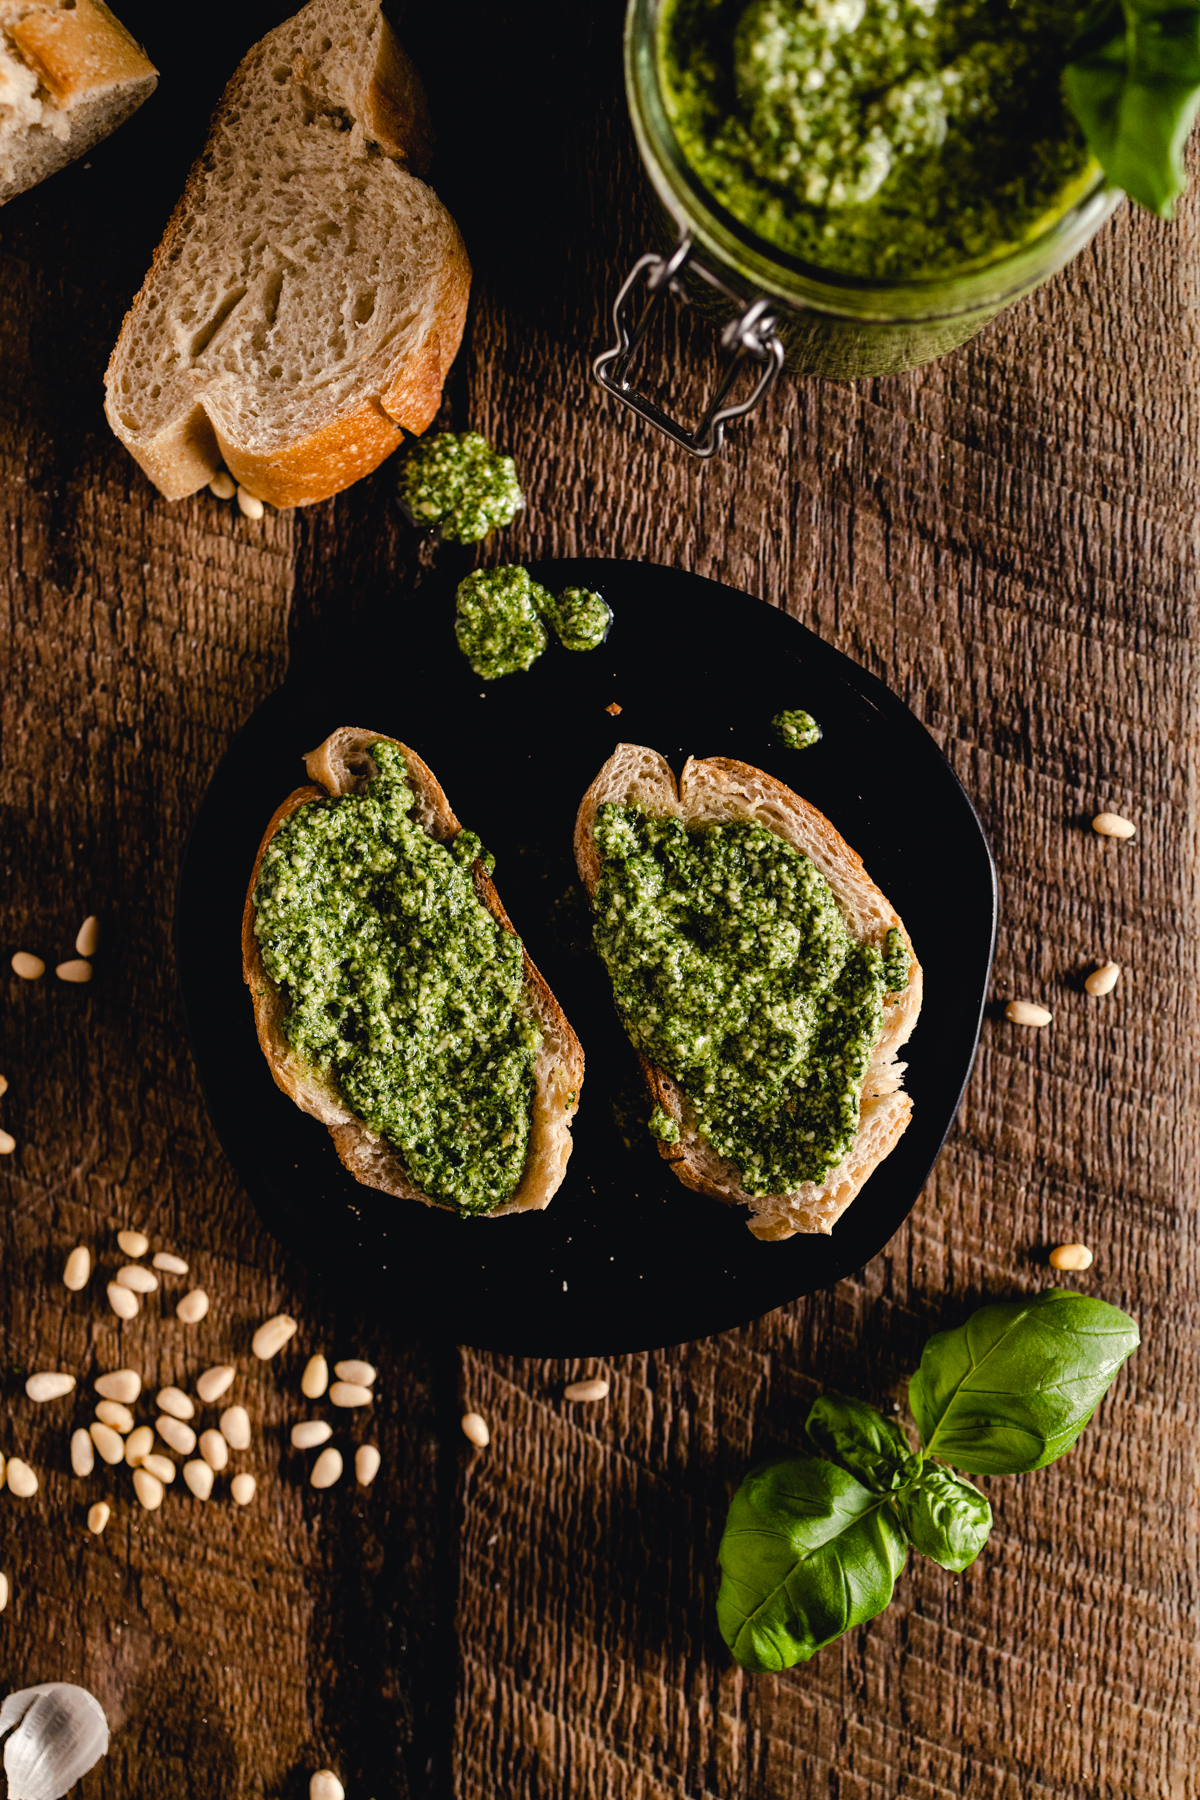 A plate with bread and pesto on it.